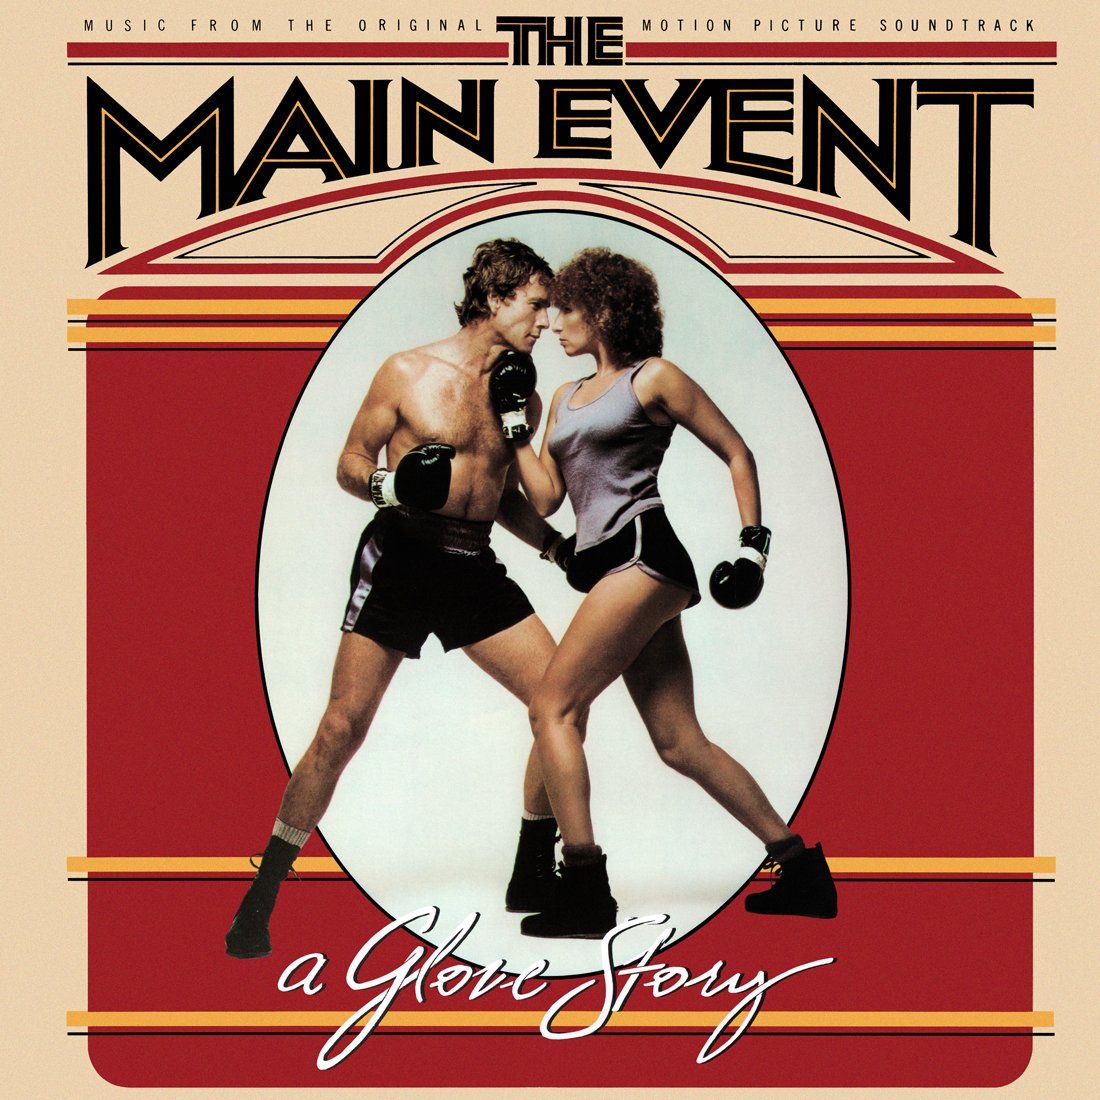 The Main Event album cover. Scan by Kevin Schlenker,